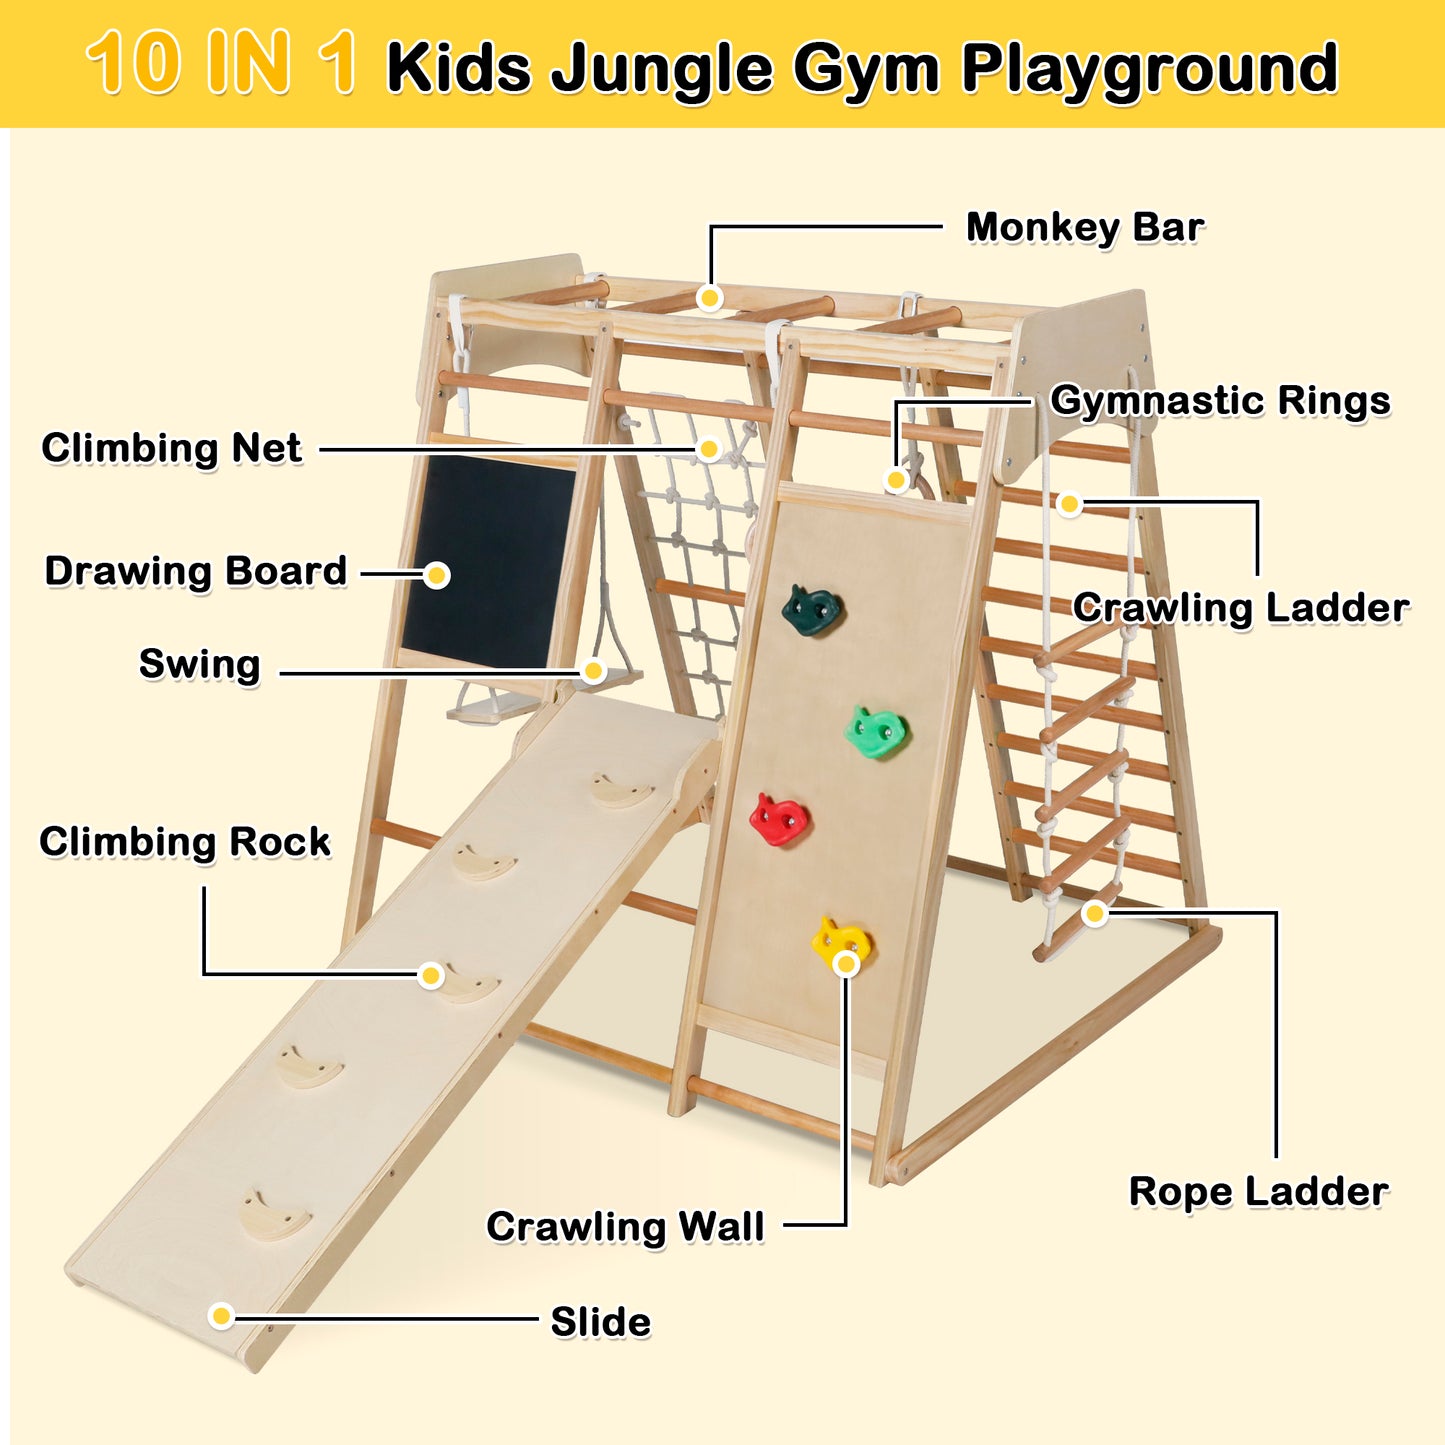 Toddler Climbing Set, 10 in 1 Kids Climber Slide Playset with Ladder/Ramp/Monkey Bar/Drawing Board, Indoor Wooden Jungle Gym, Natural